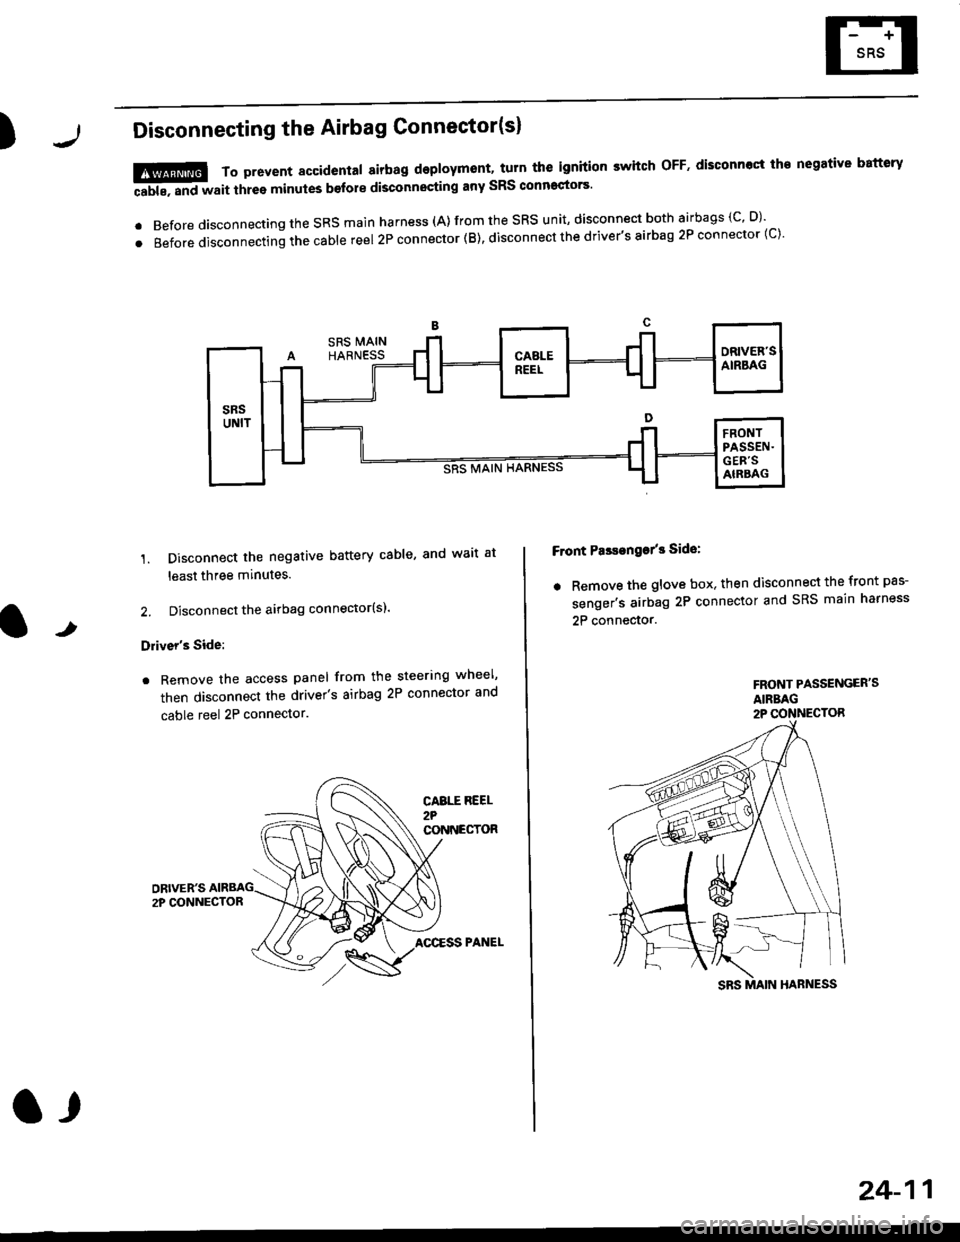 HONDA CIVIC 1997 6.G Service Manual )Disconnecting the Airbag Connector(sl
1. Disconnect the negative battery cable, and wait at
least three minutes.
2. Disconnect the airbag connector(sl.
Drivers Side:
. Remove the access panel from 